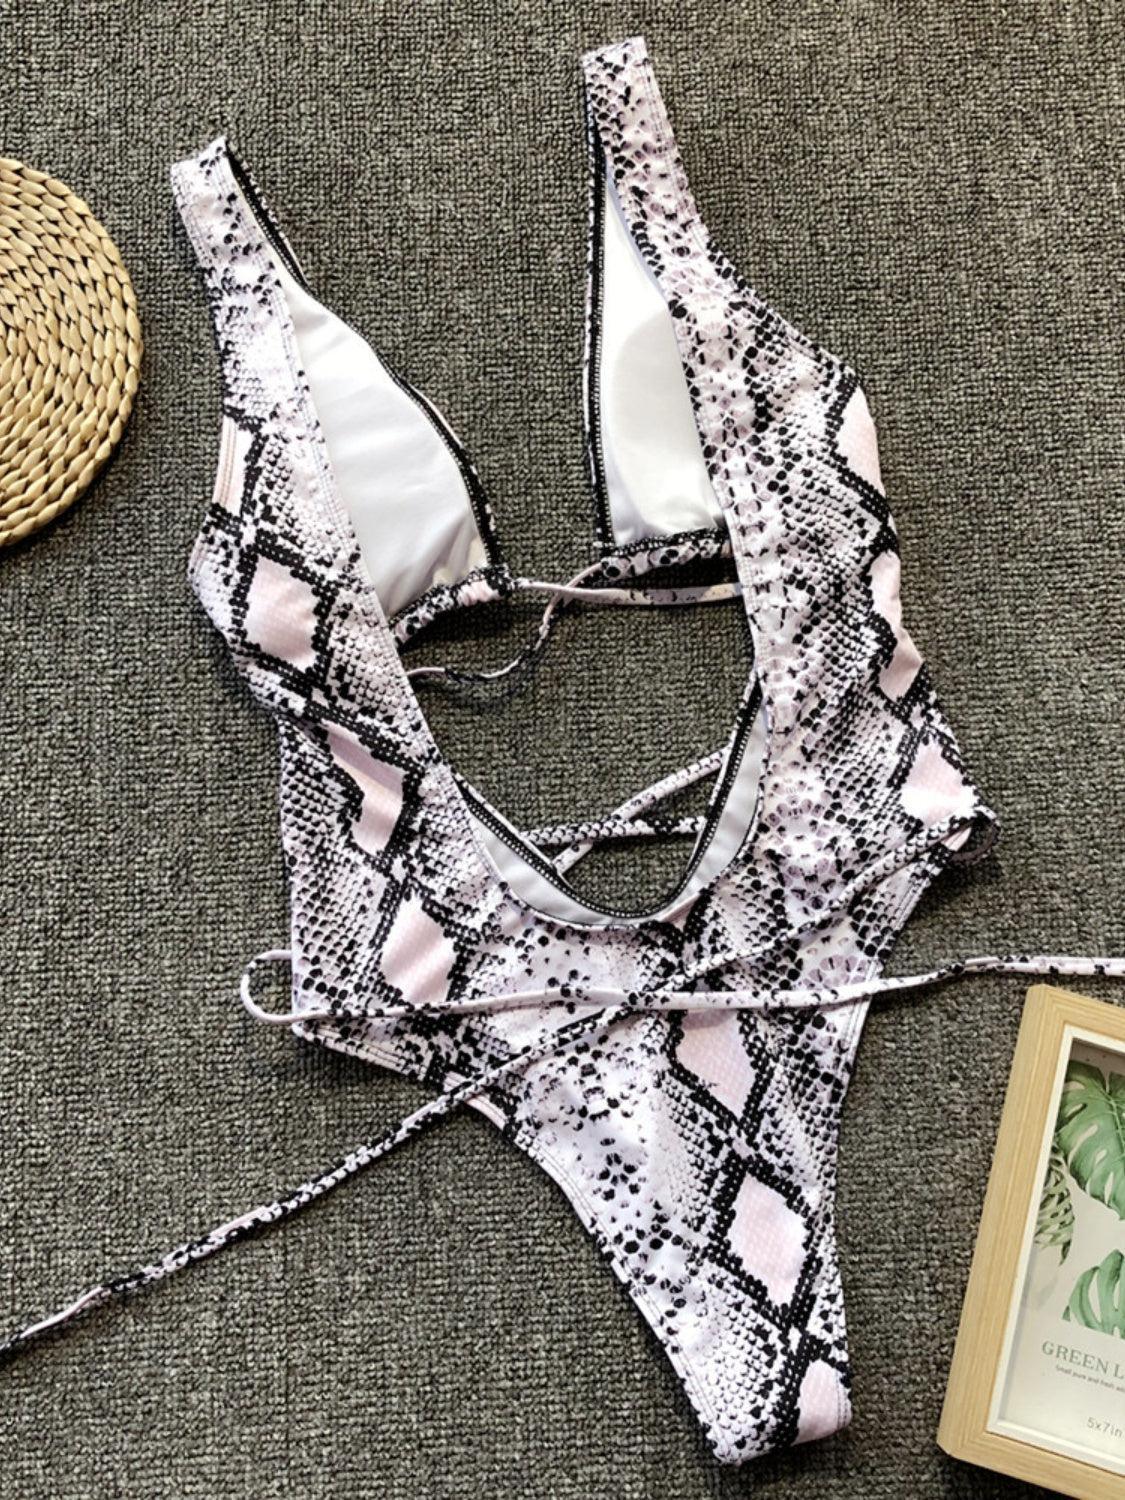 a woman's bra with a picture of a snake skin pattern